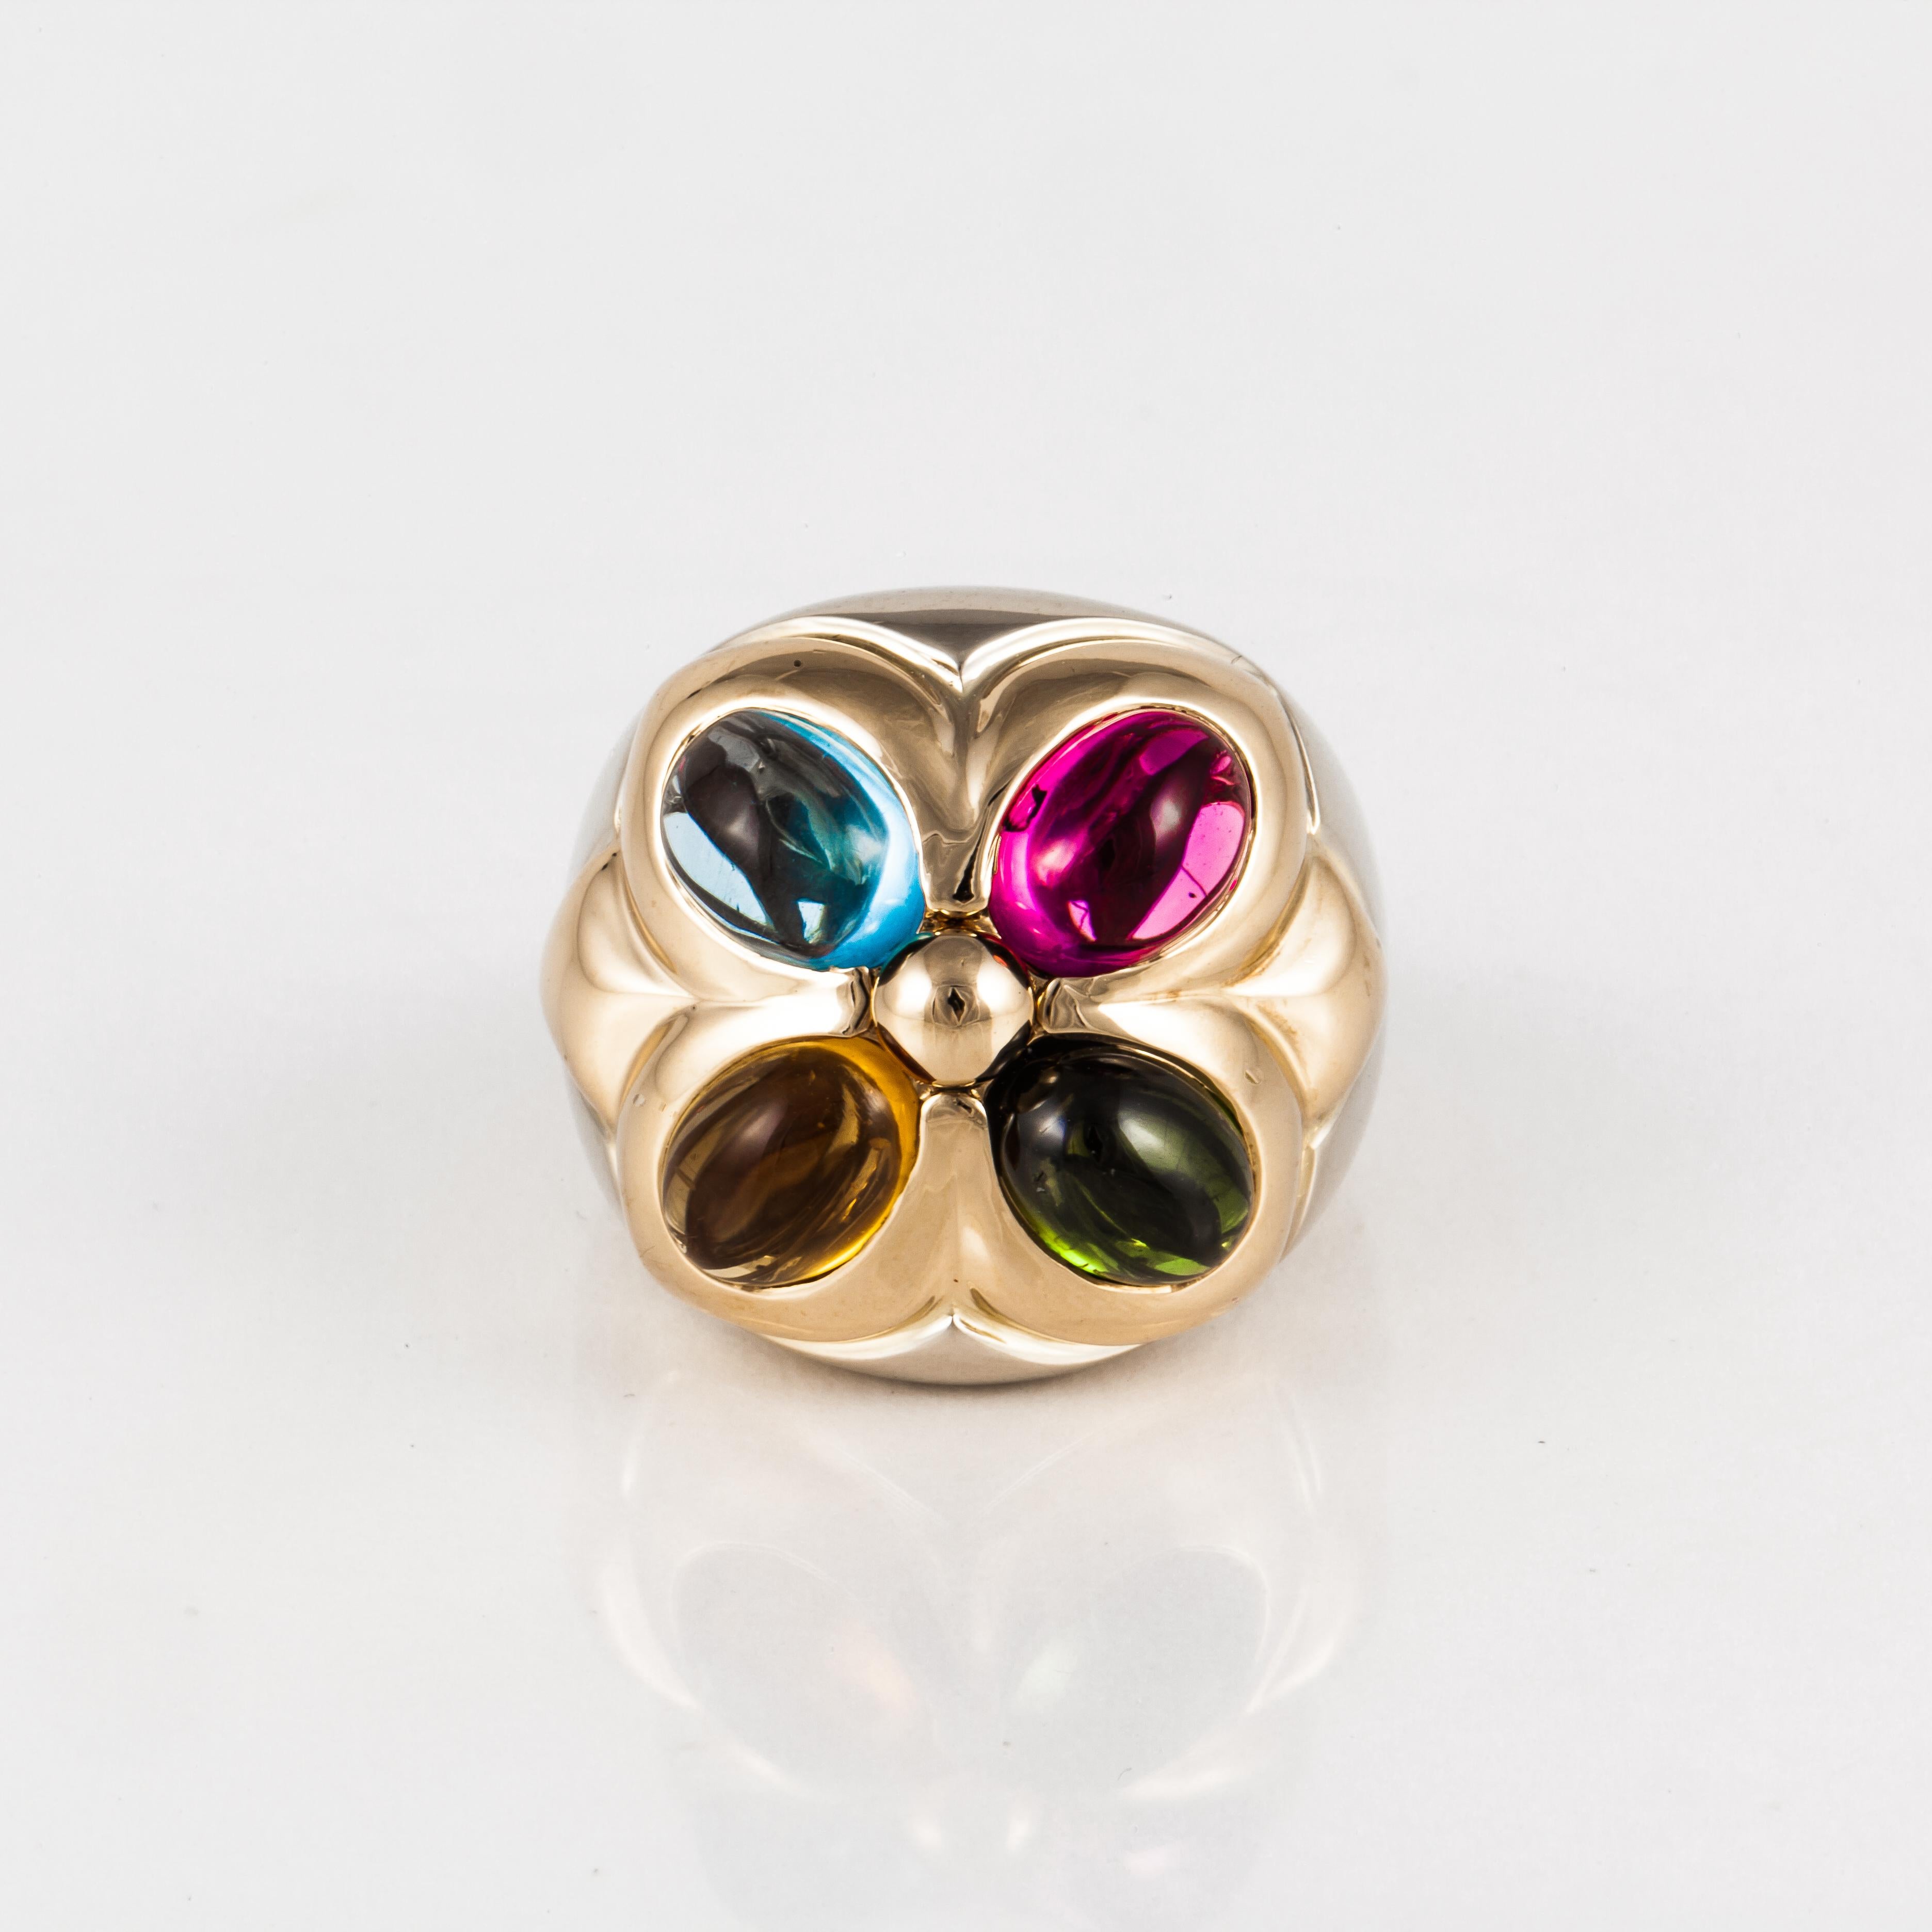 Bulgari ring featuring four oval cabochons in citrine, blue topaz, green tourmaline and pink tourmaline set in 18K yellow and white gold. Ring is currently a size 6 or European 52.  Measures 3/4 inches by 3/4 inches.  